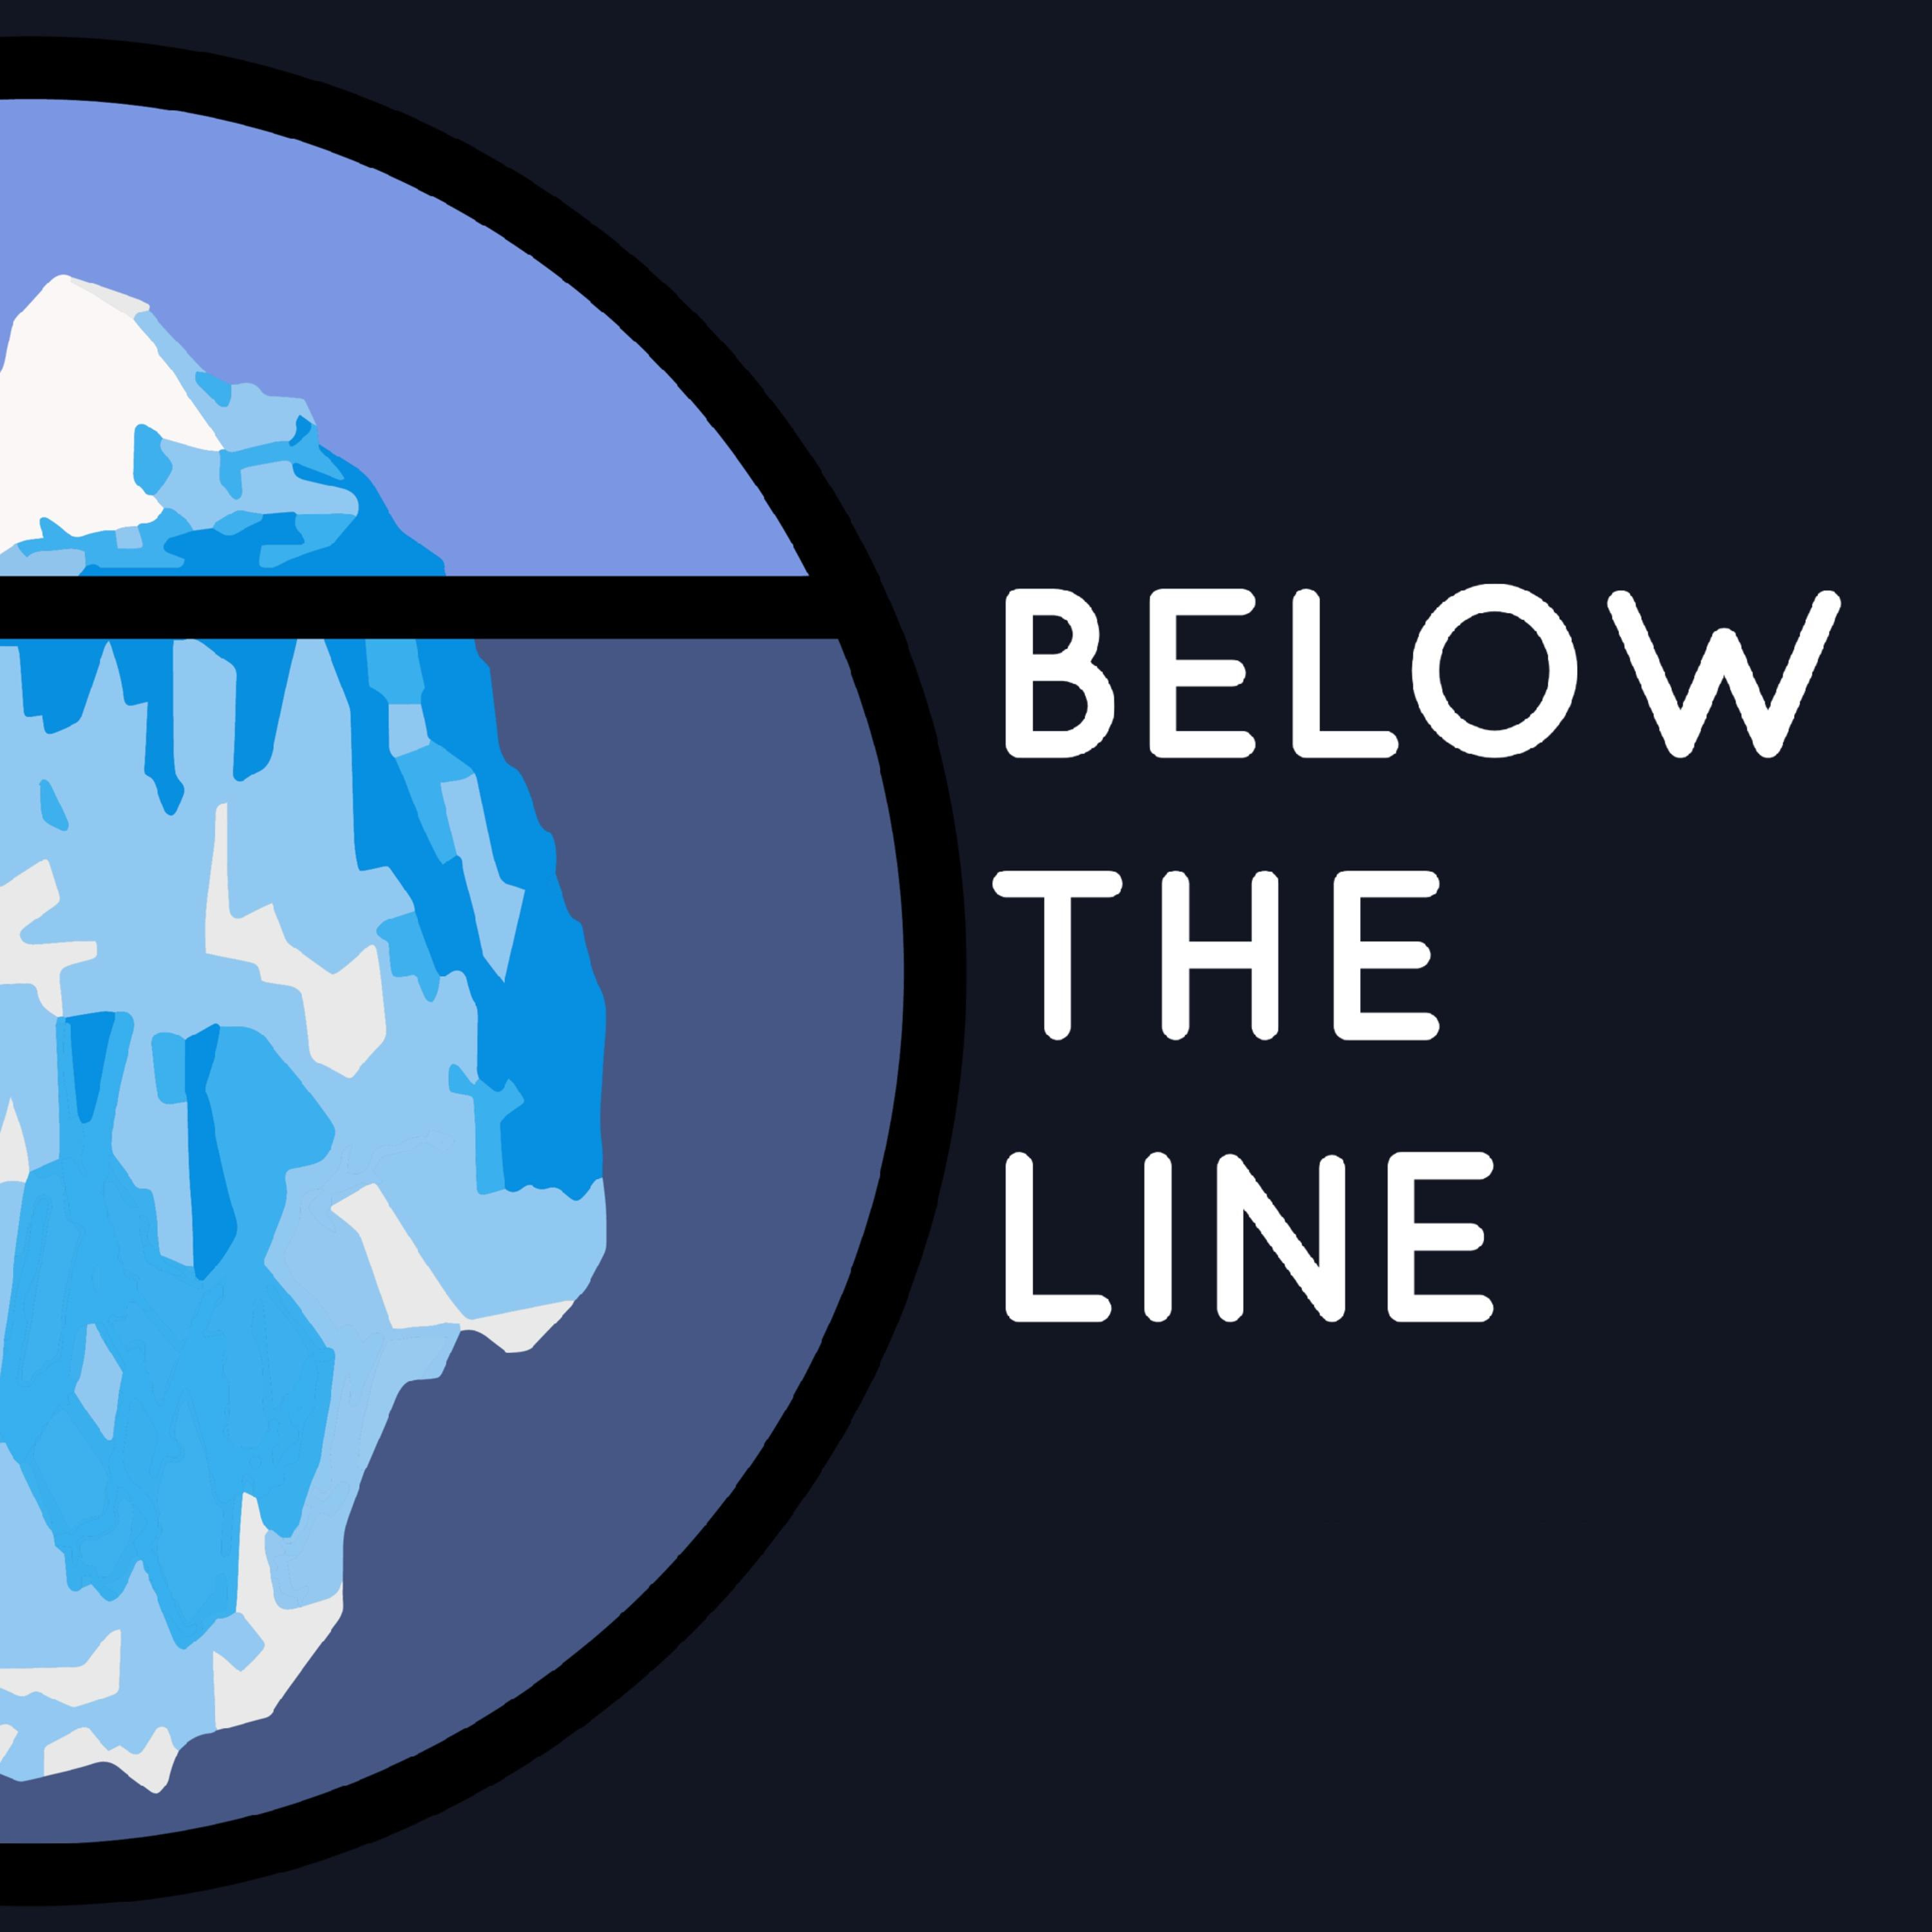 Kevin Rose on Below the Line Intro - Part 1